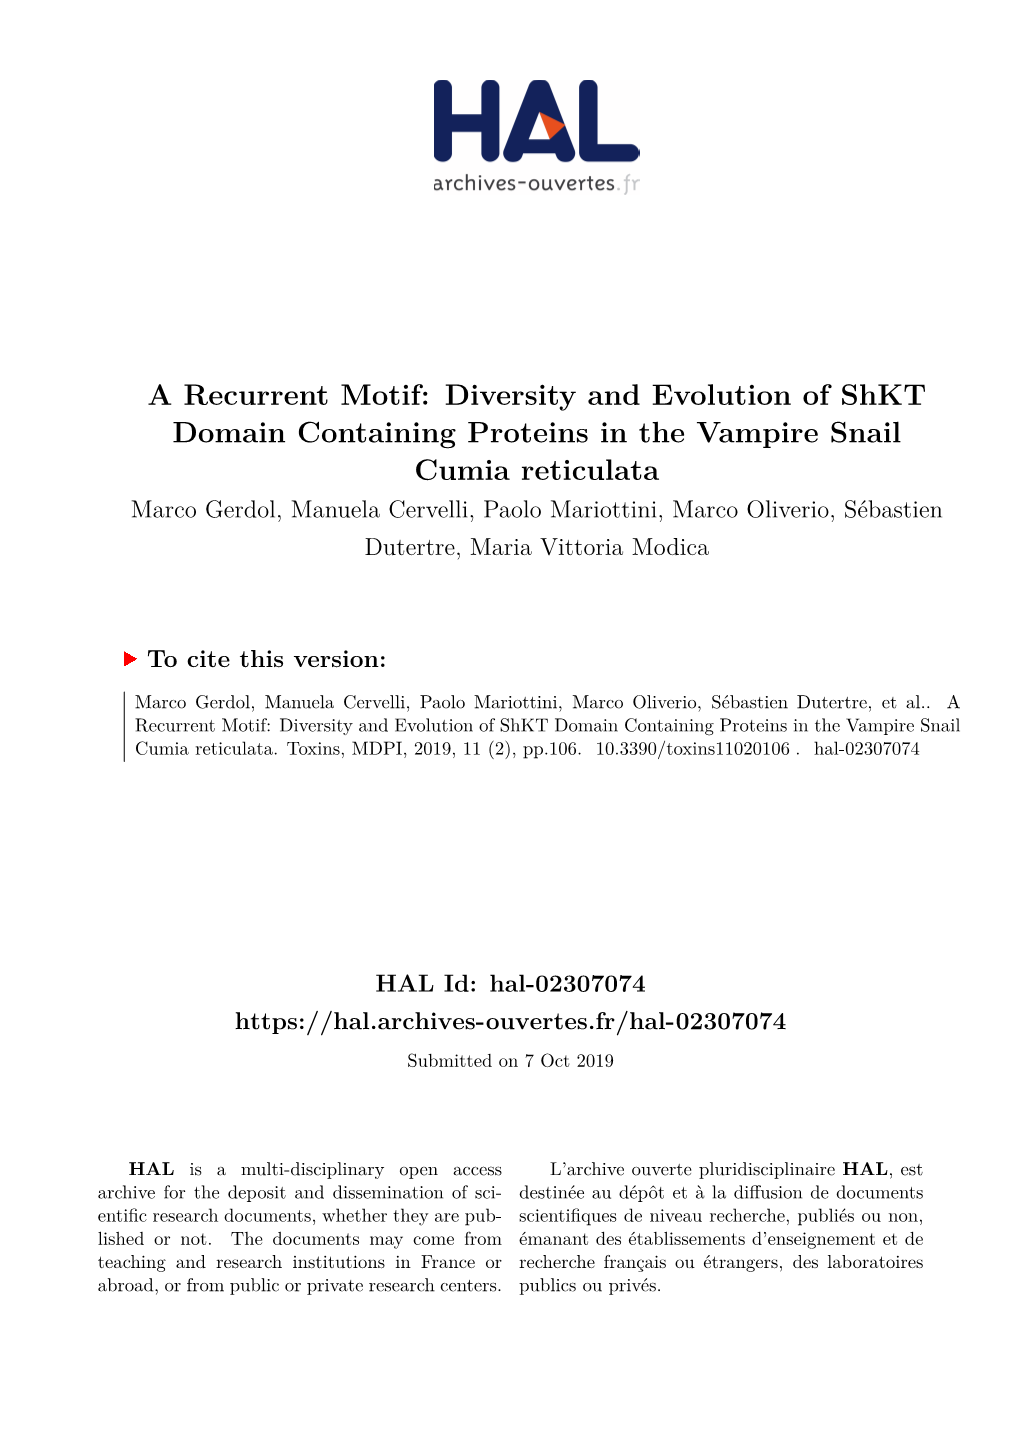 Diversity and Evolution of Shkt Domain Containing Proteins in The